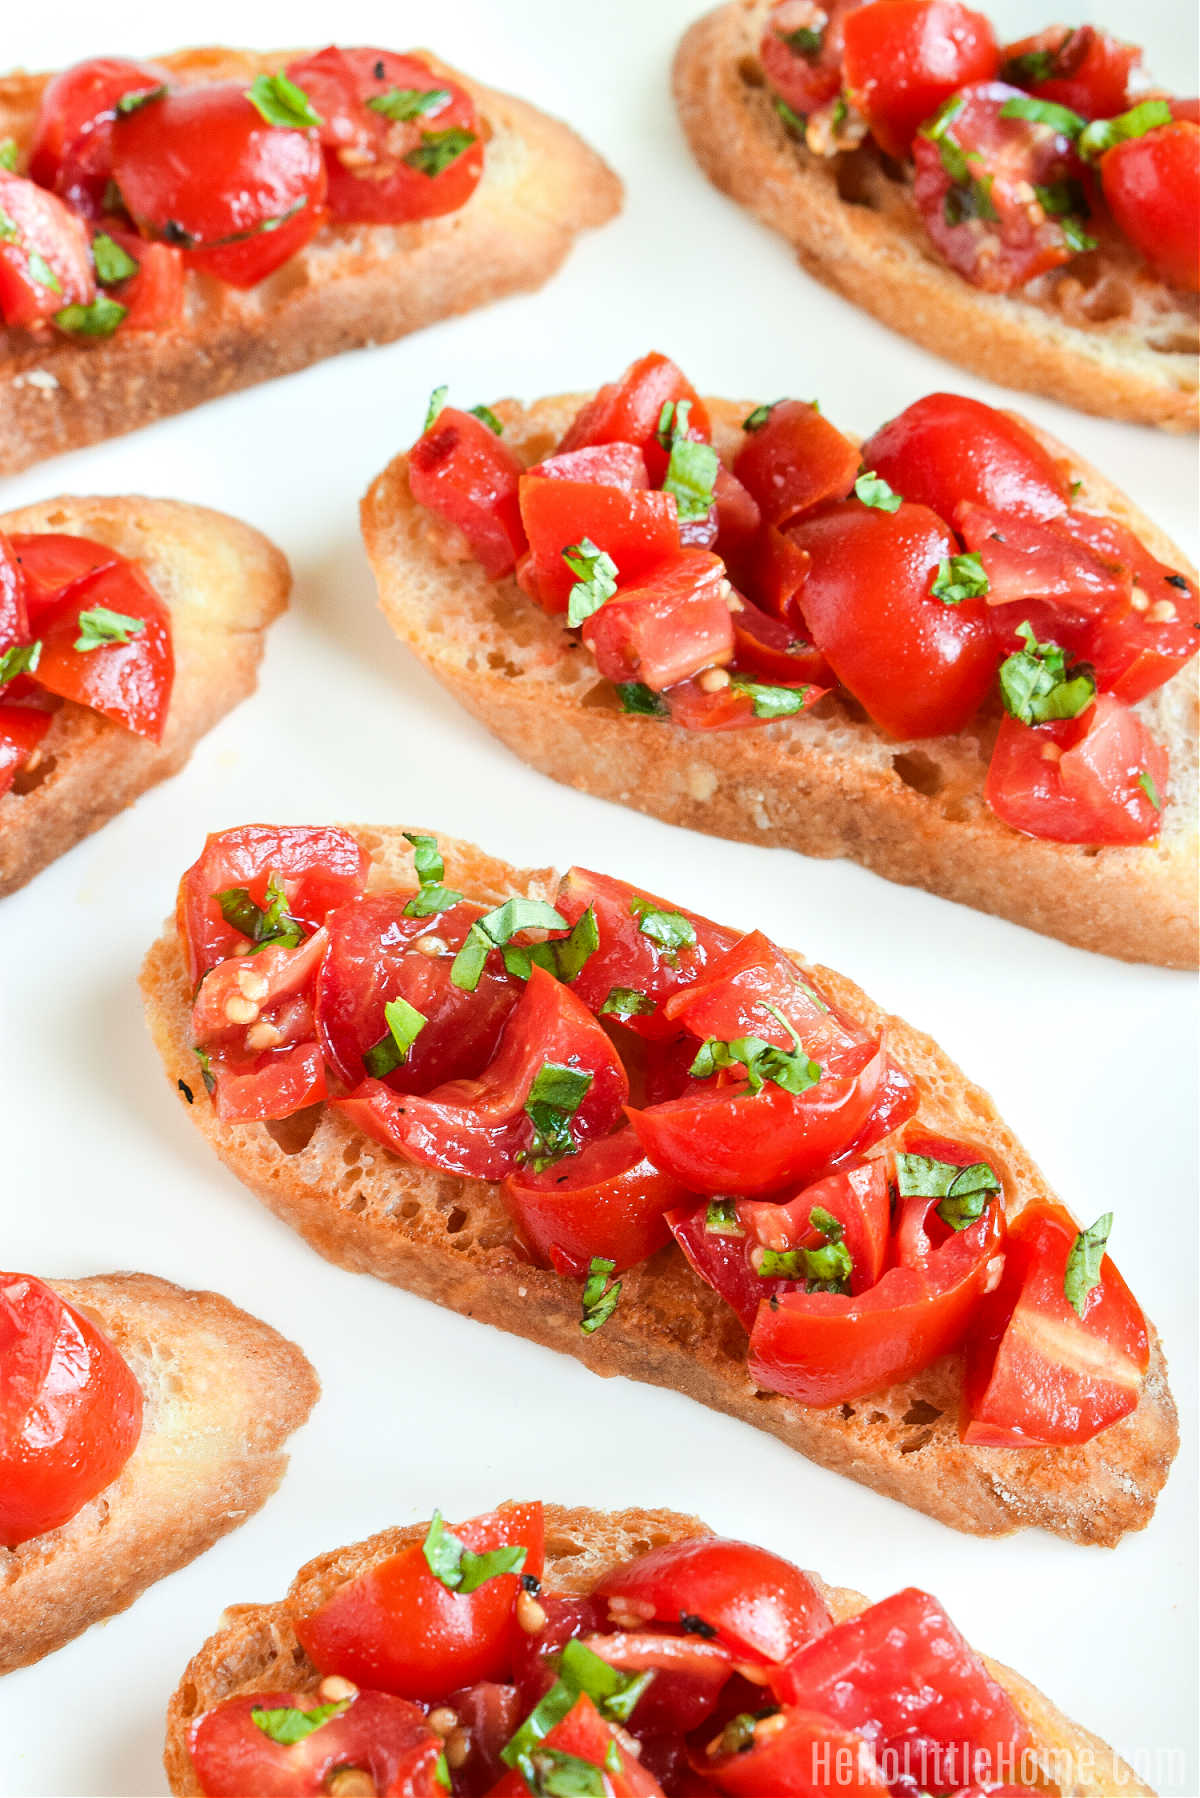 The finished tomato topped toasts on a white tray.